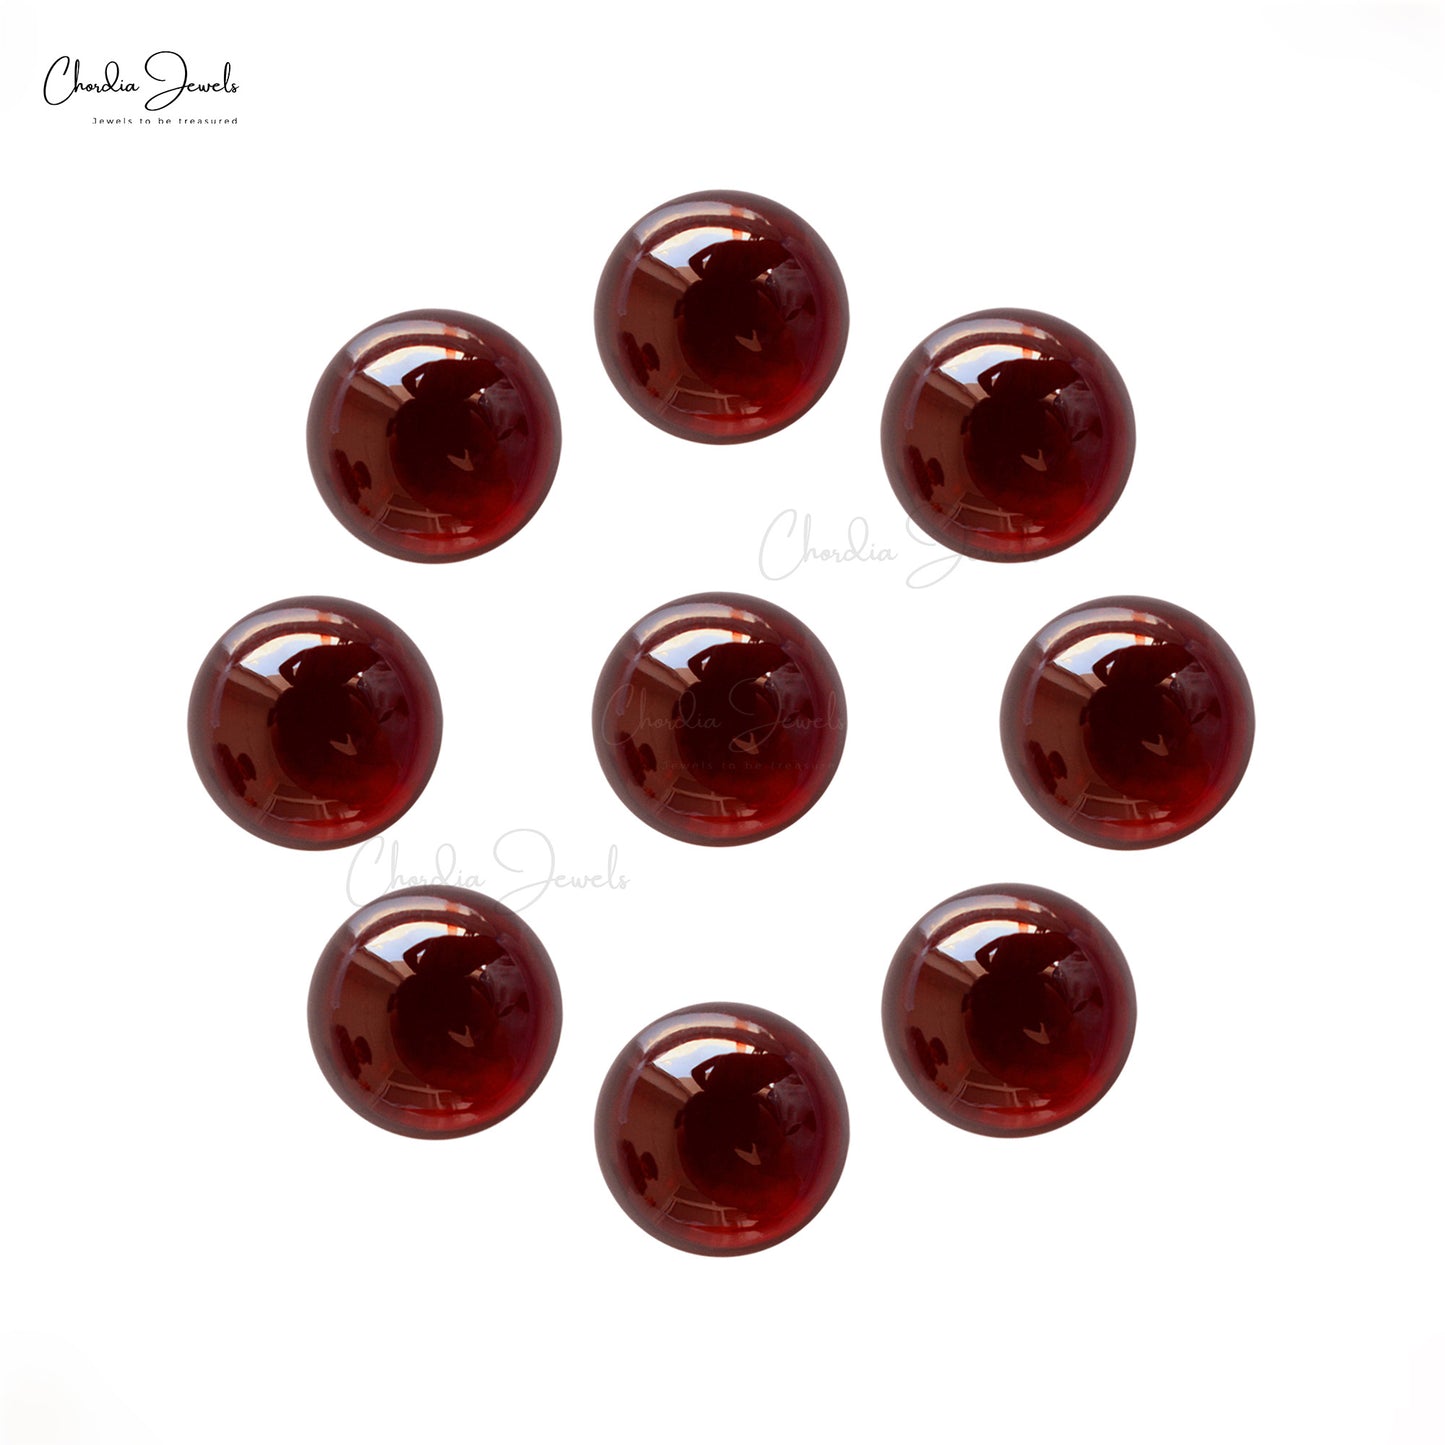 Garnet Round Cabochon Fine Quality 2 MM-2.50 MM Red Color Loose Gemstone for Rings, 1 Piece